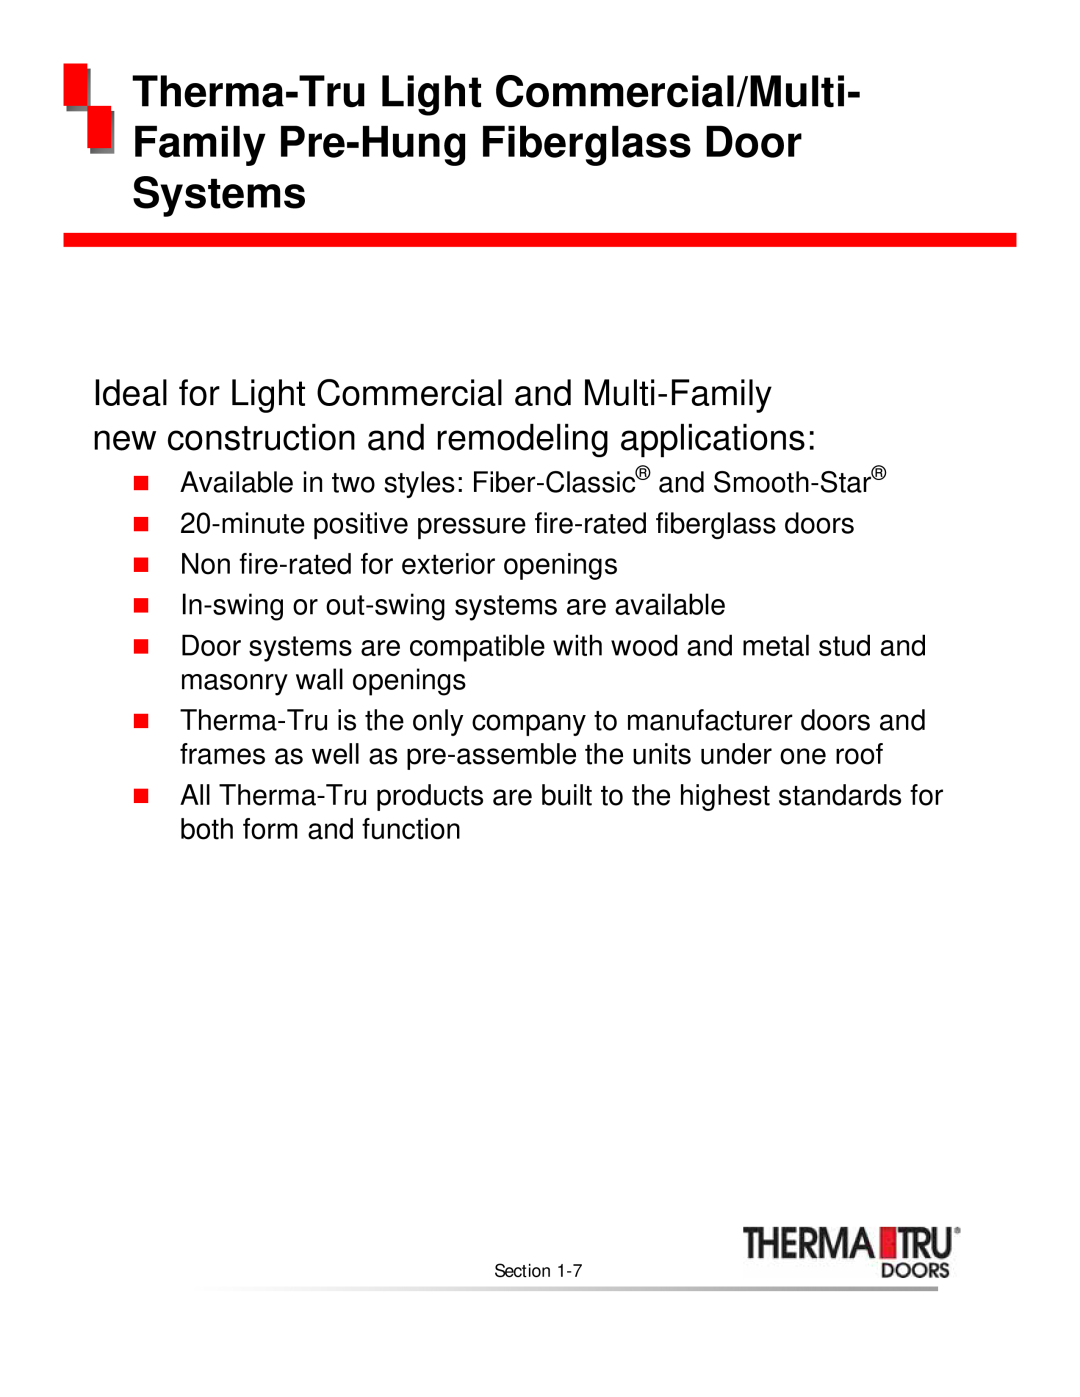 Therma-Tru none manual Family Pre-HungFiberglass Door Systems, Therma-TruLight Commercial/Multi 